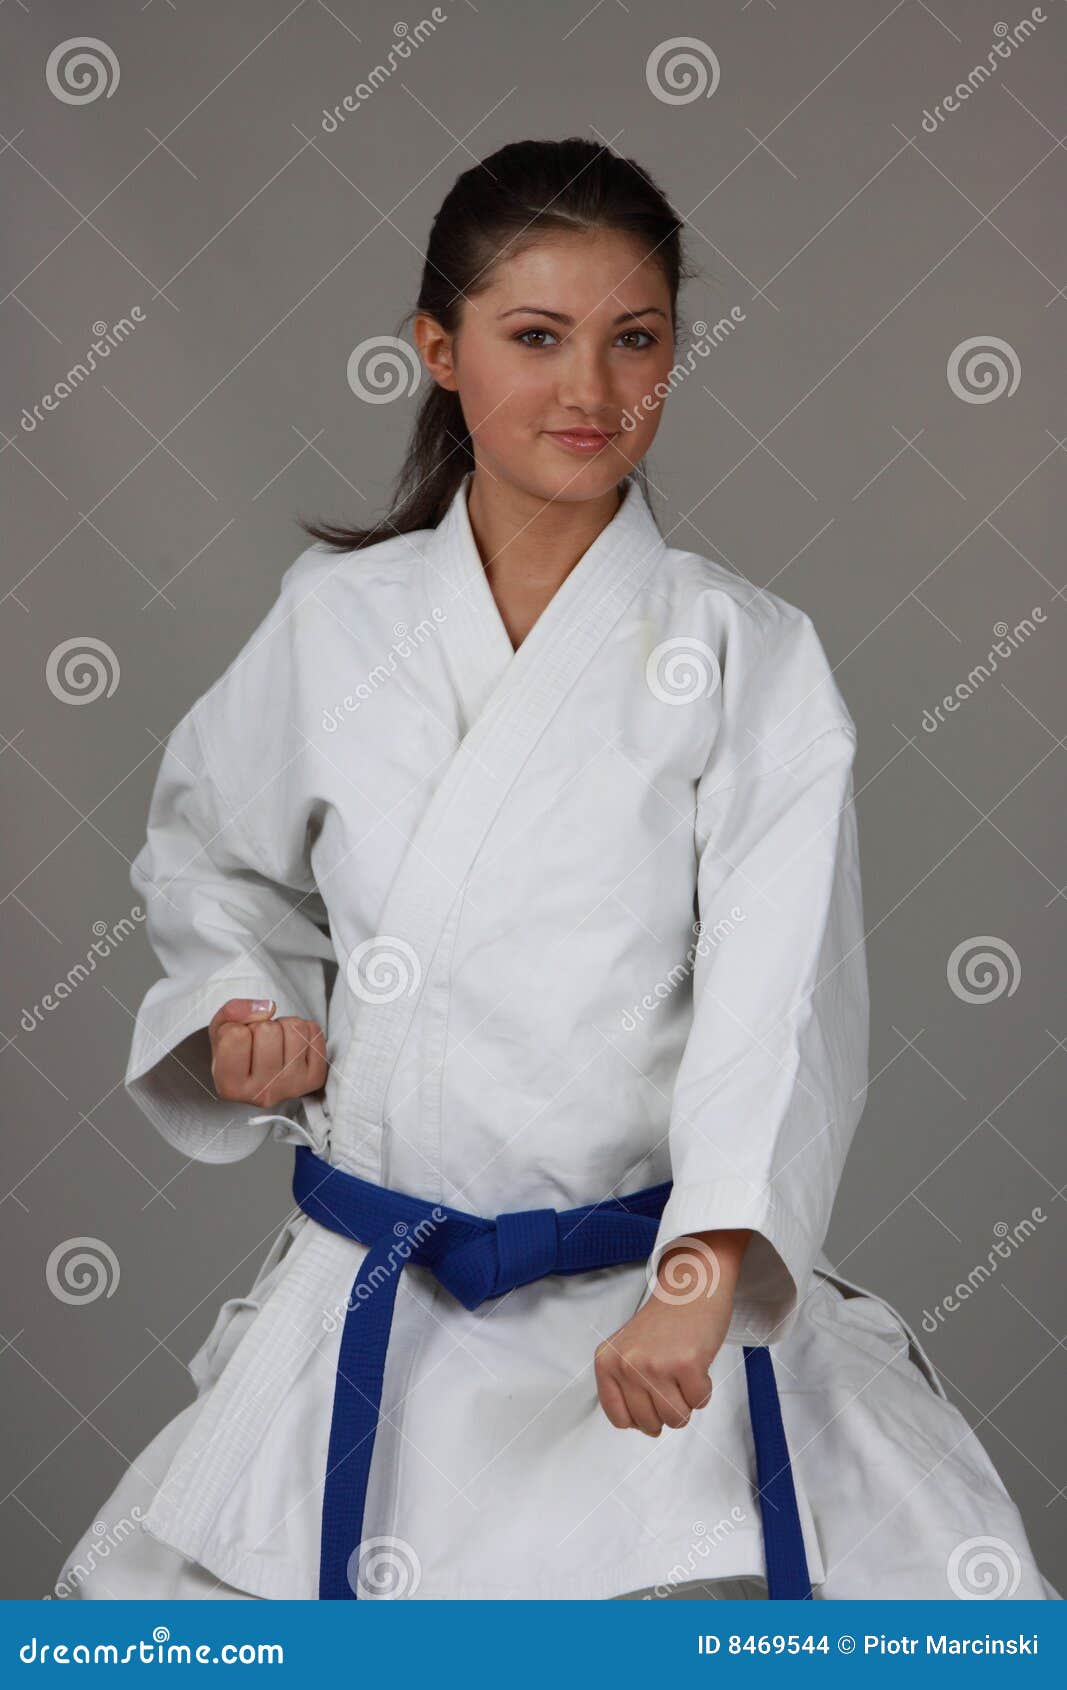 Karate Girl stock photo. Image of expression, fast, judo - 8469544